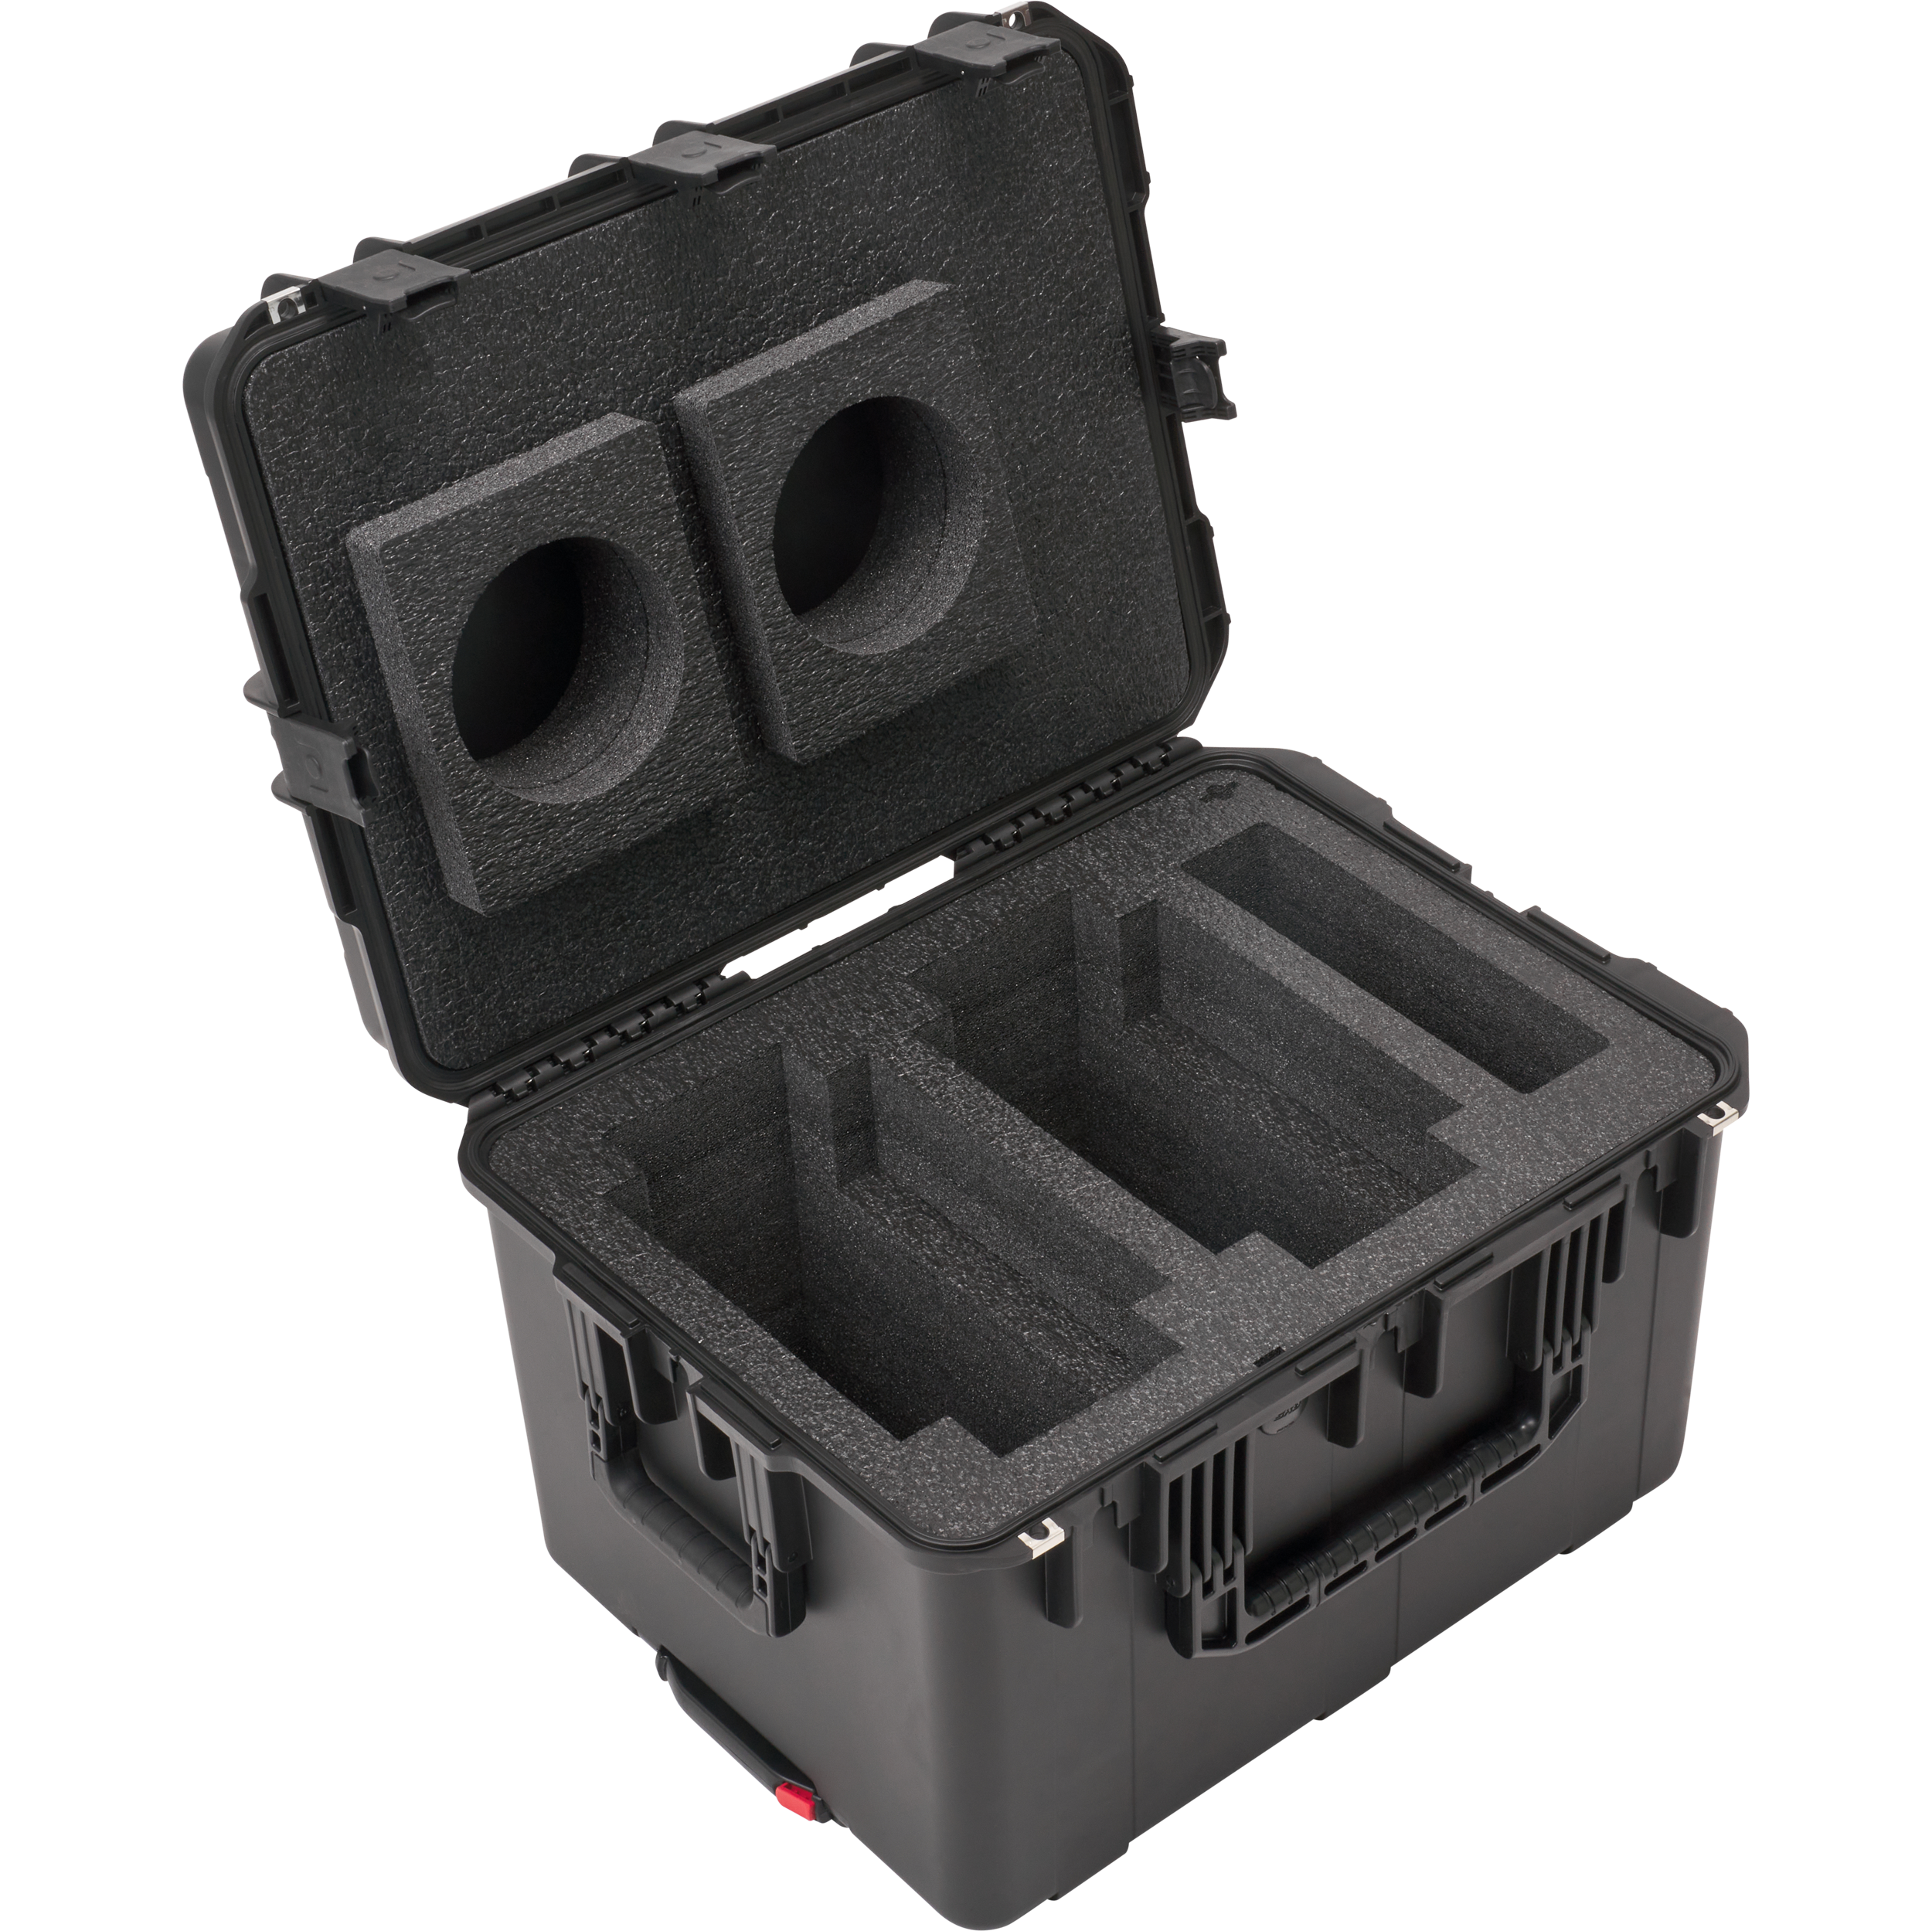 BYFP ipCase for 2x Chauvet Ovation B565FC